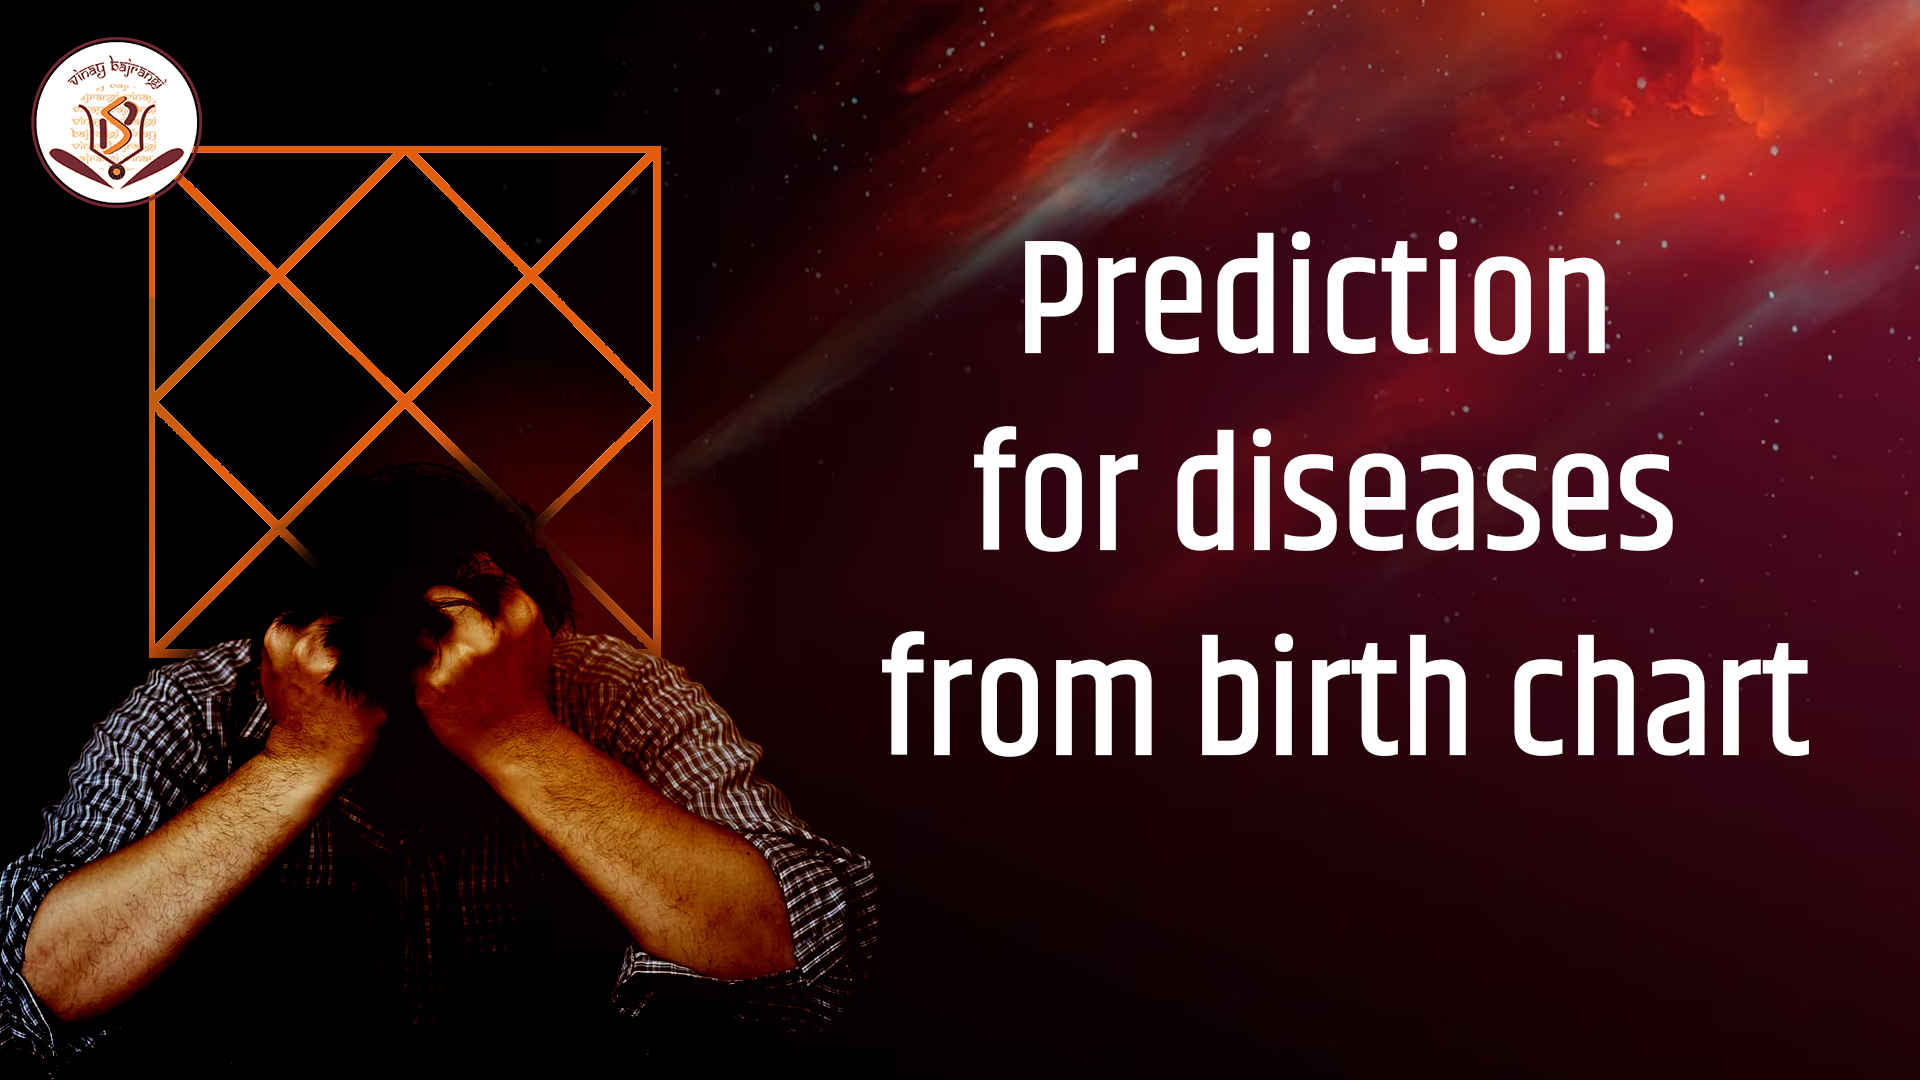 Medical Astrology: Prediction for disease from birth chart